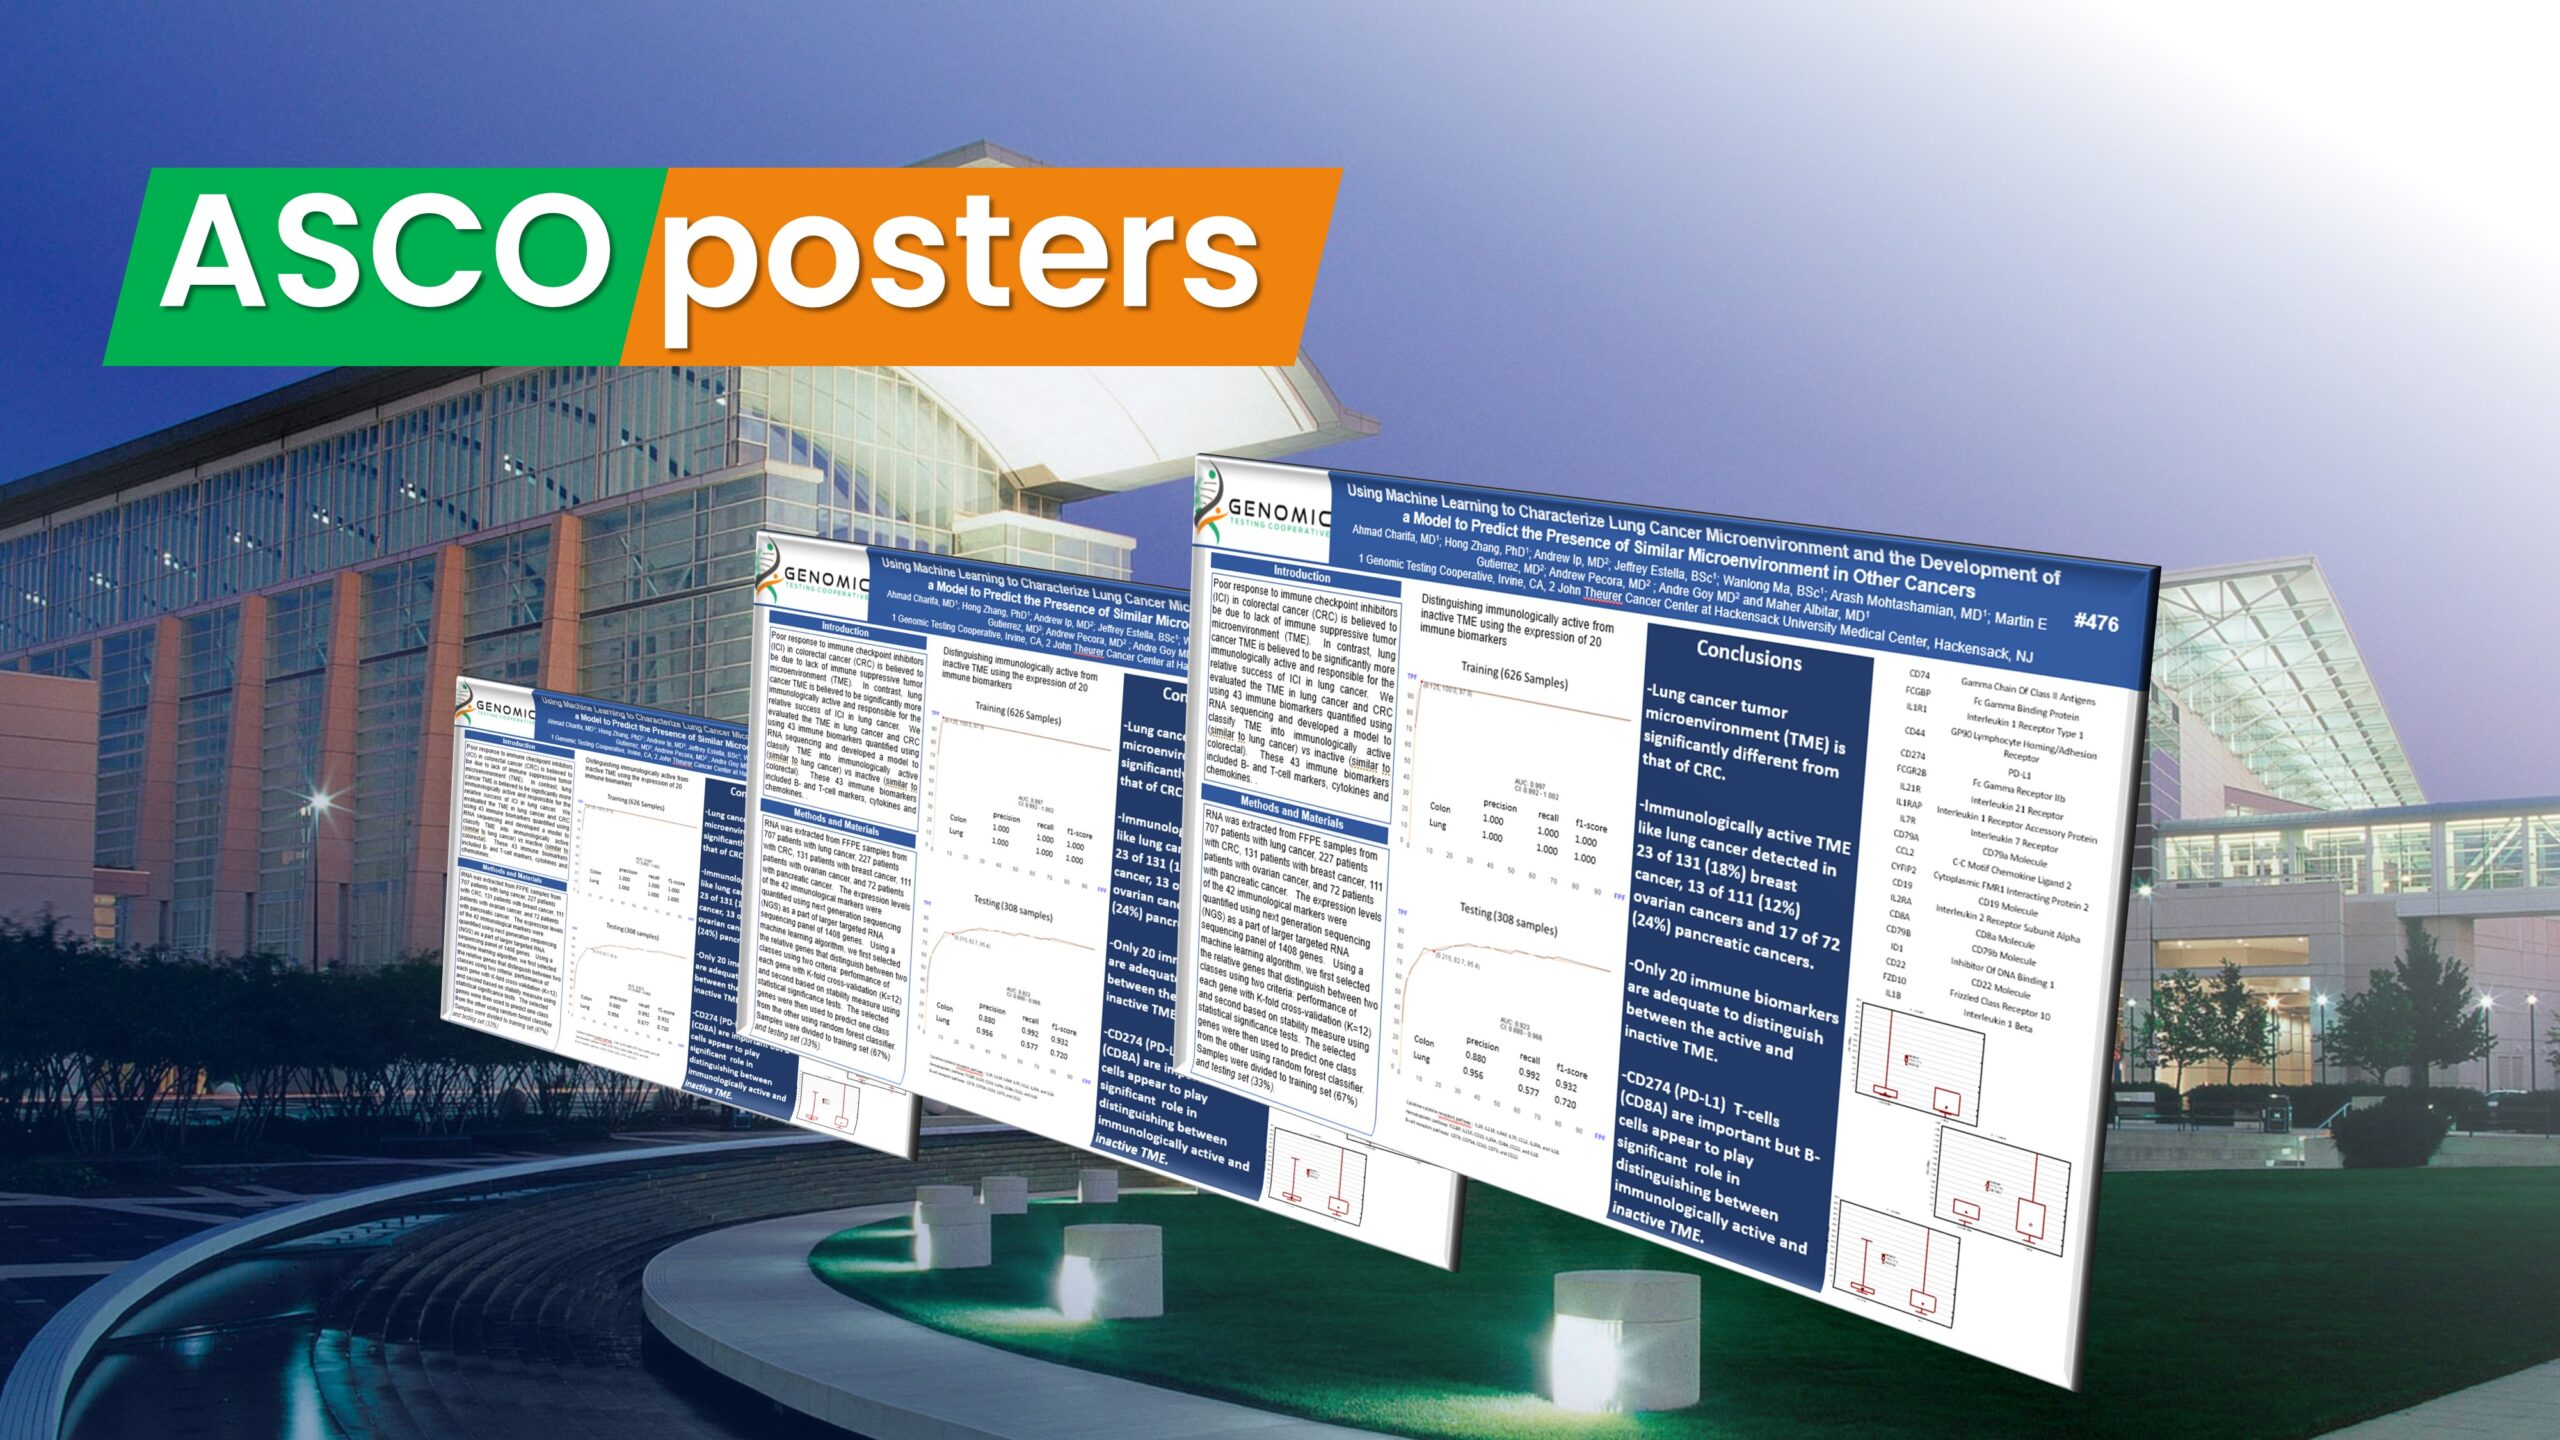 ASCO 23 posters available